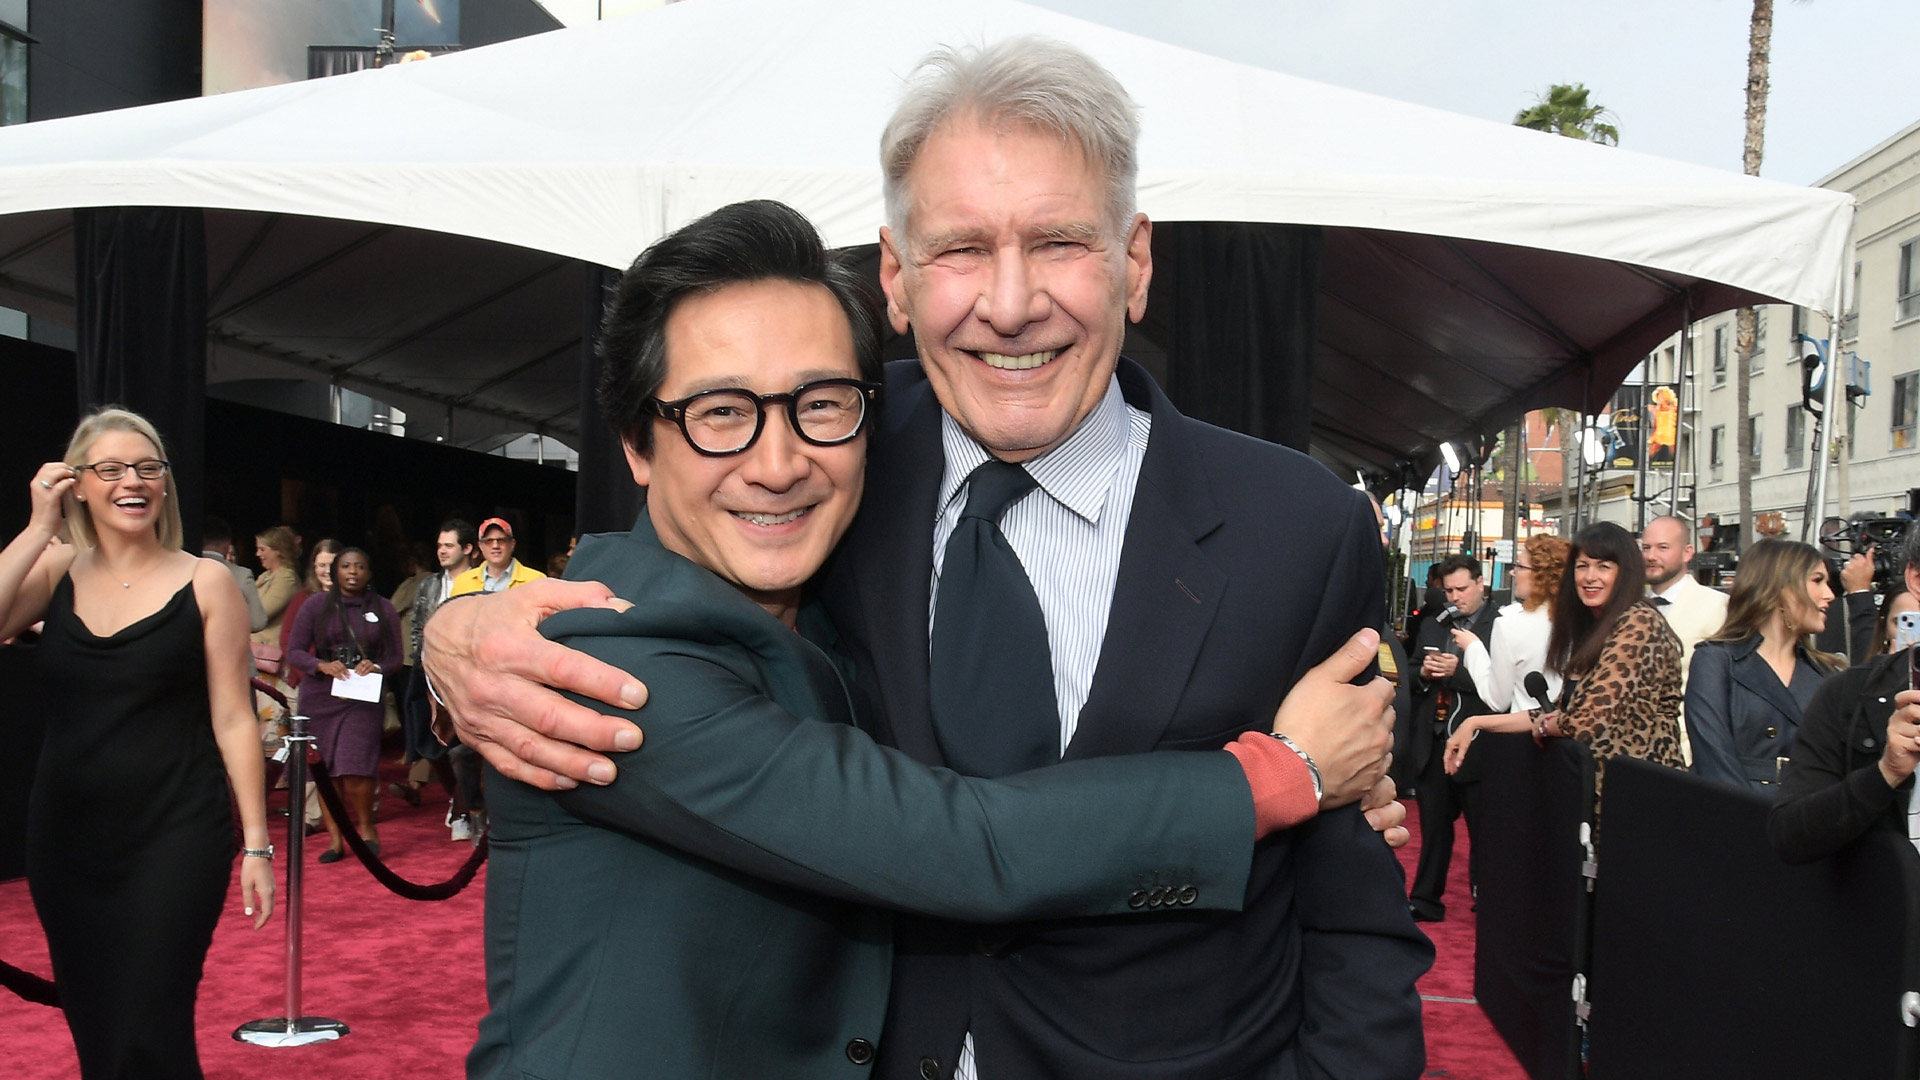 Harrison Ford and Ke Huy Quan at the U.S. premiere red carpet